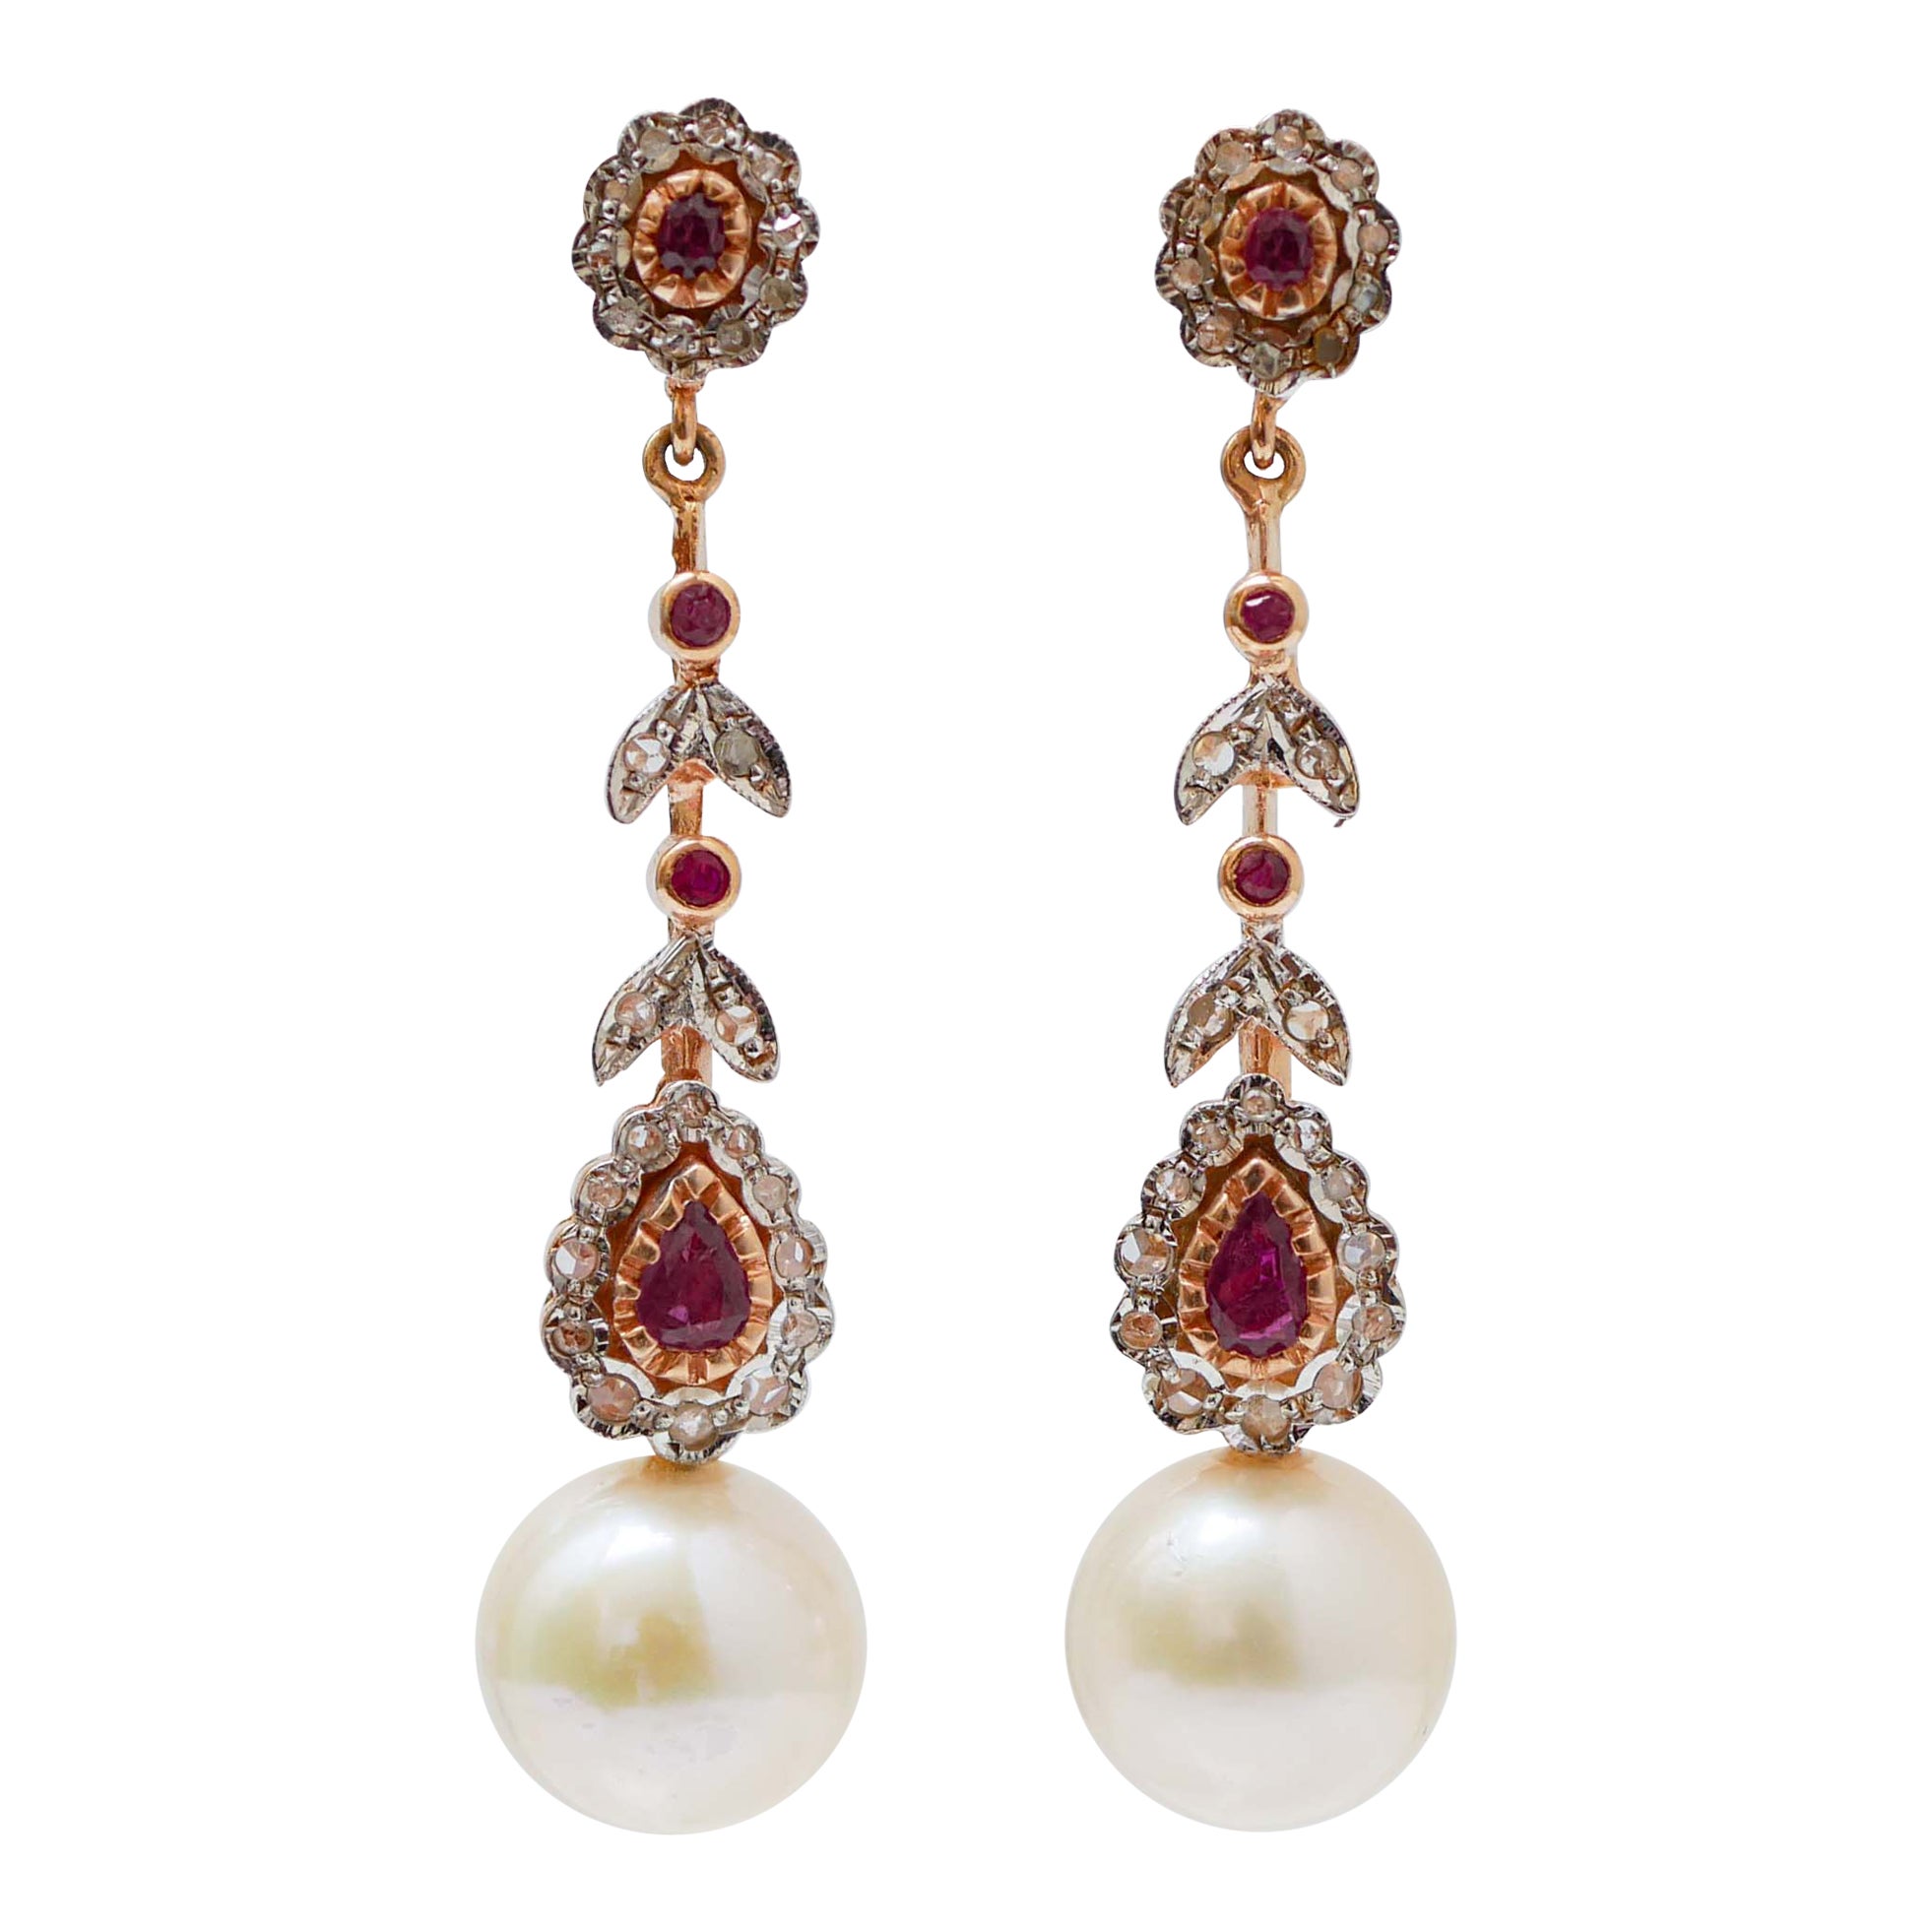 White Pearls, Rubies, Diamonds, Rose Gold and Silver Dangle Earrings.